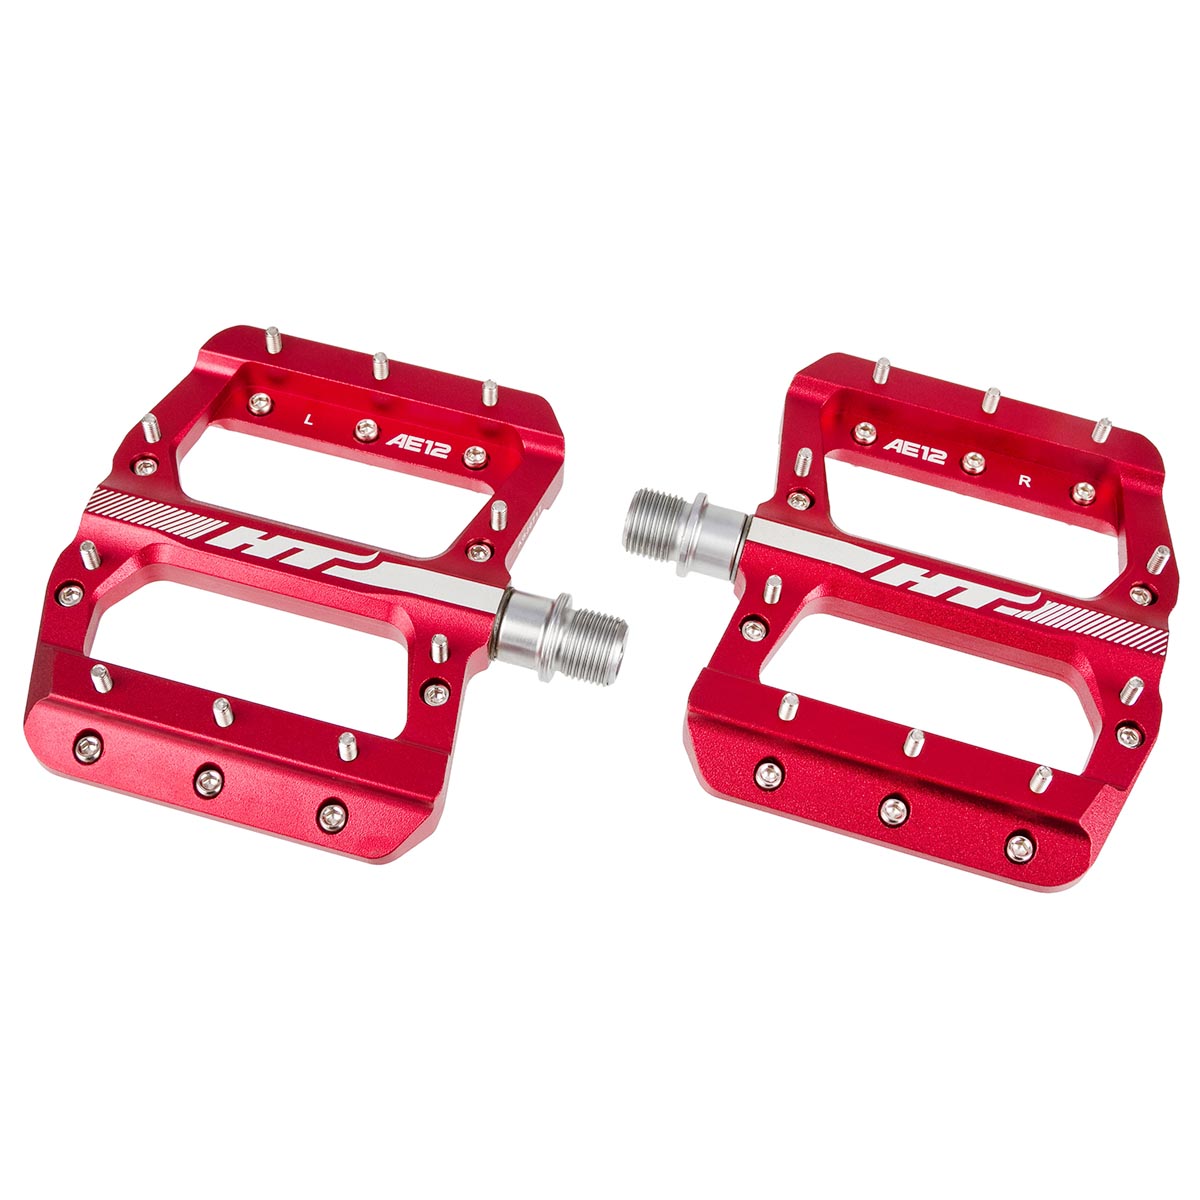 HT Components Pedal AE12 Red